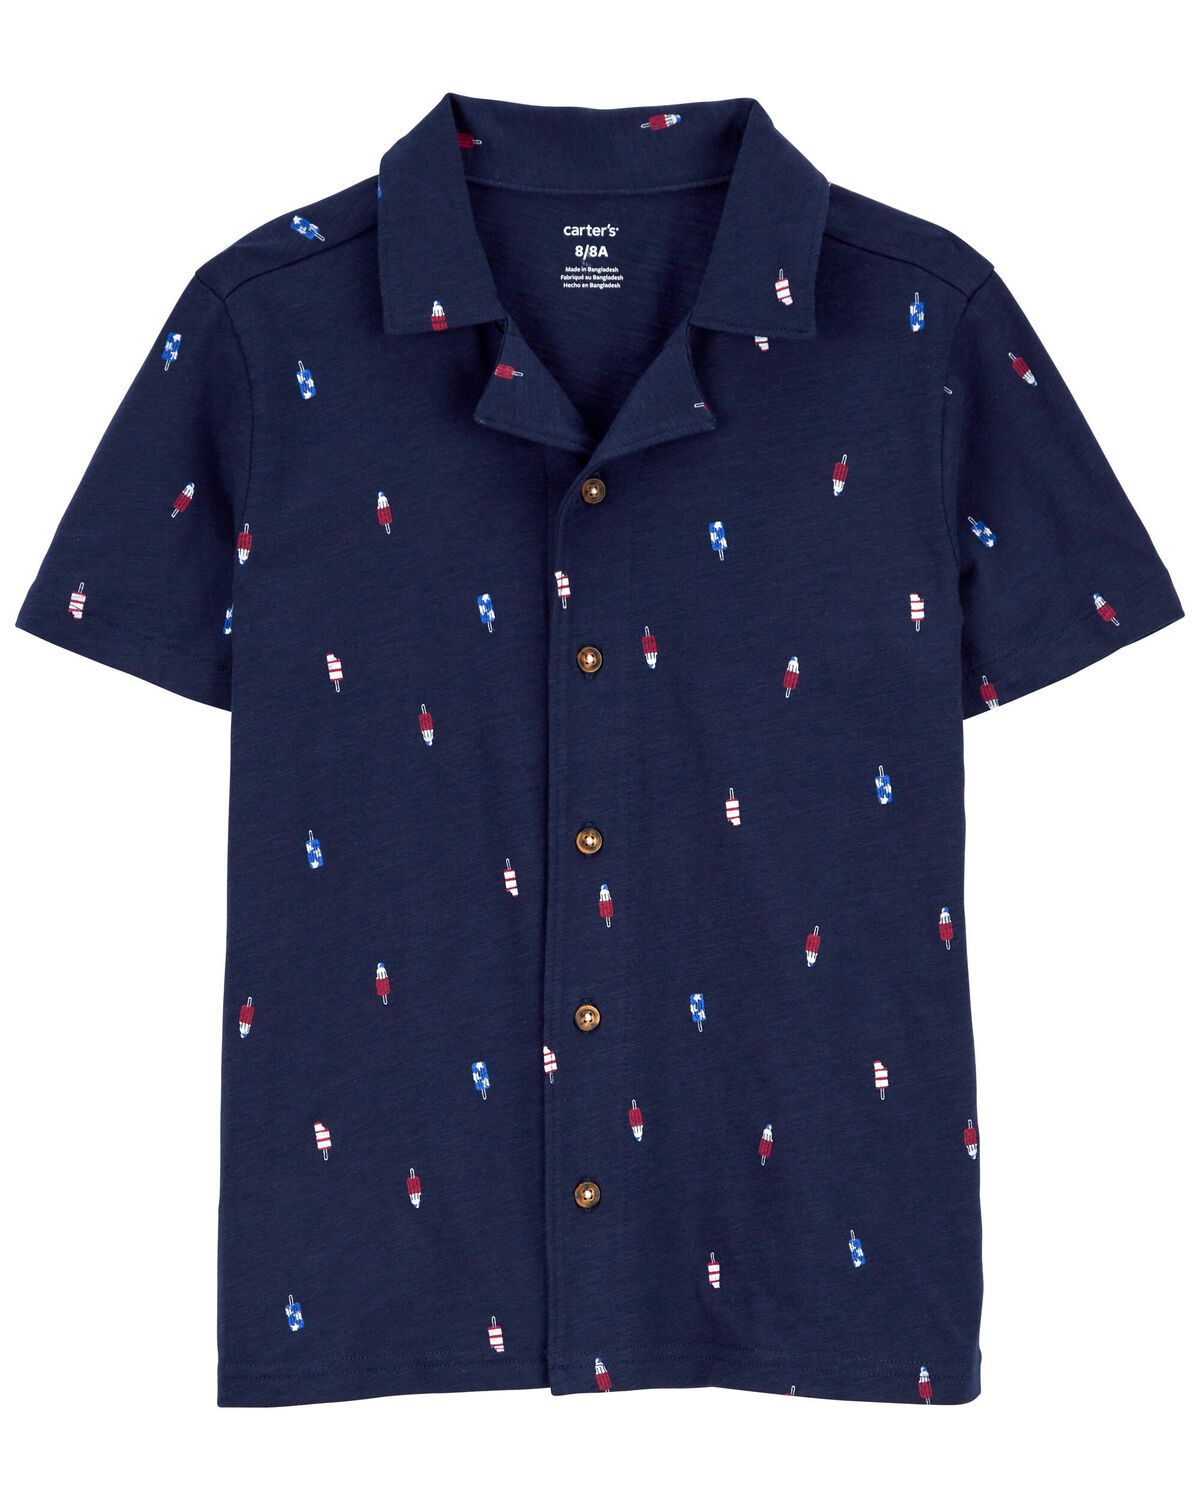 Kid Popsicle Button-Front Shirt | Carter's